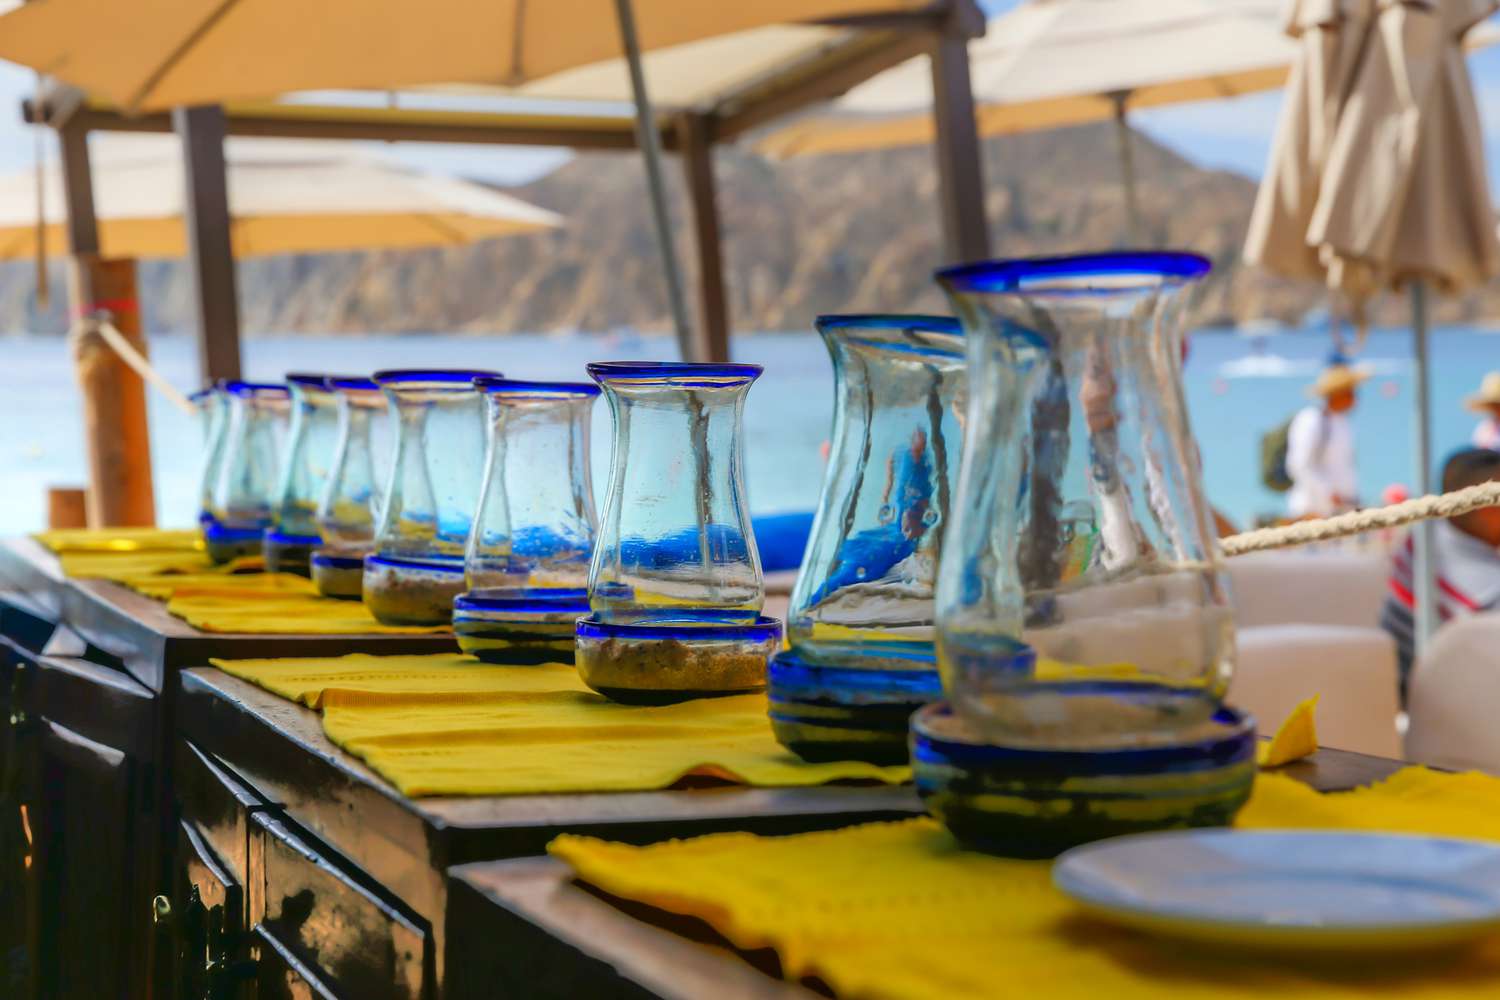 Rustic water jugs lined up along a patio serving table at a Mexican restaurant in Cabo San Lucas Mexico